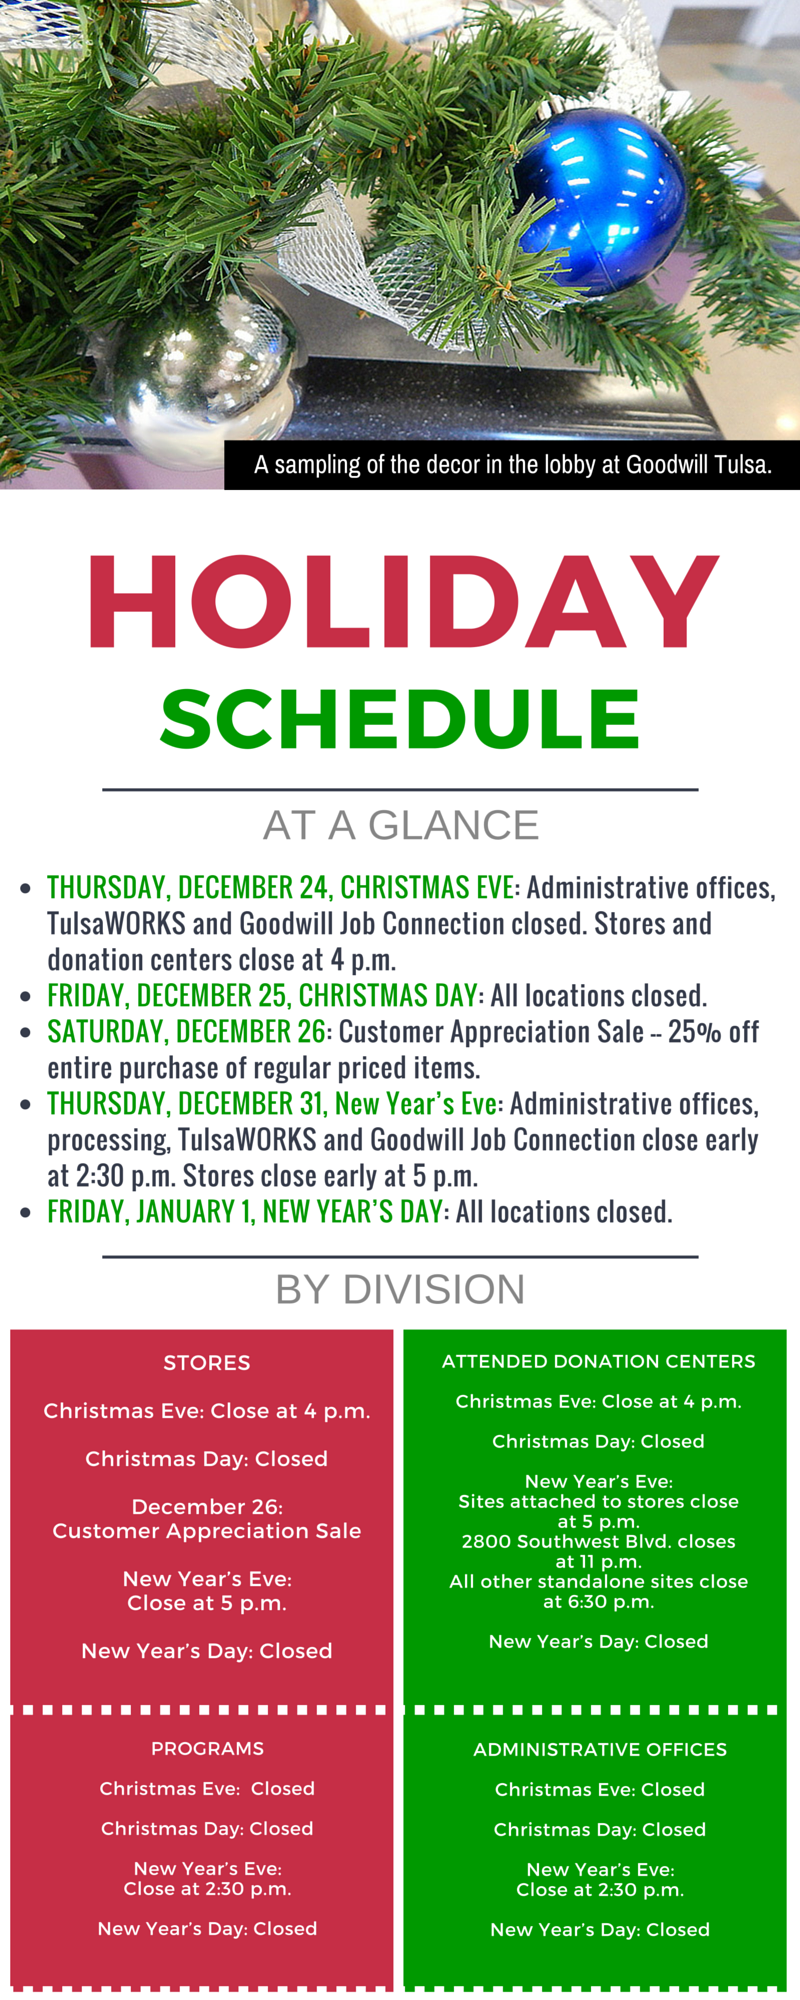 Goodwill Of Tulsa Christmas Holiday Schedule 2015 